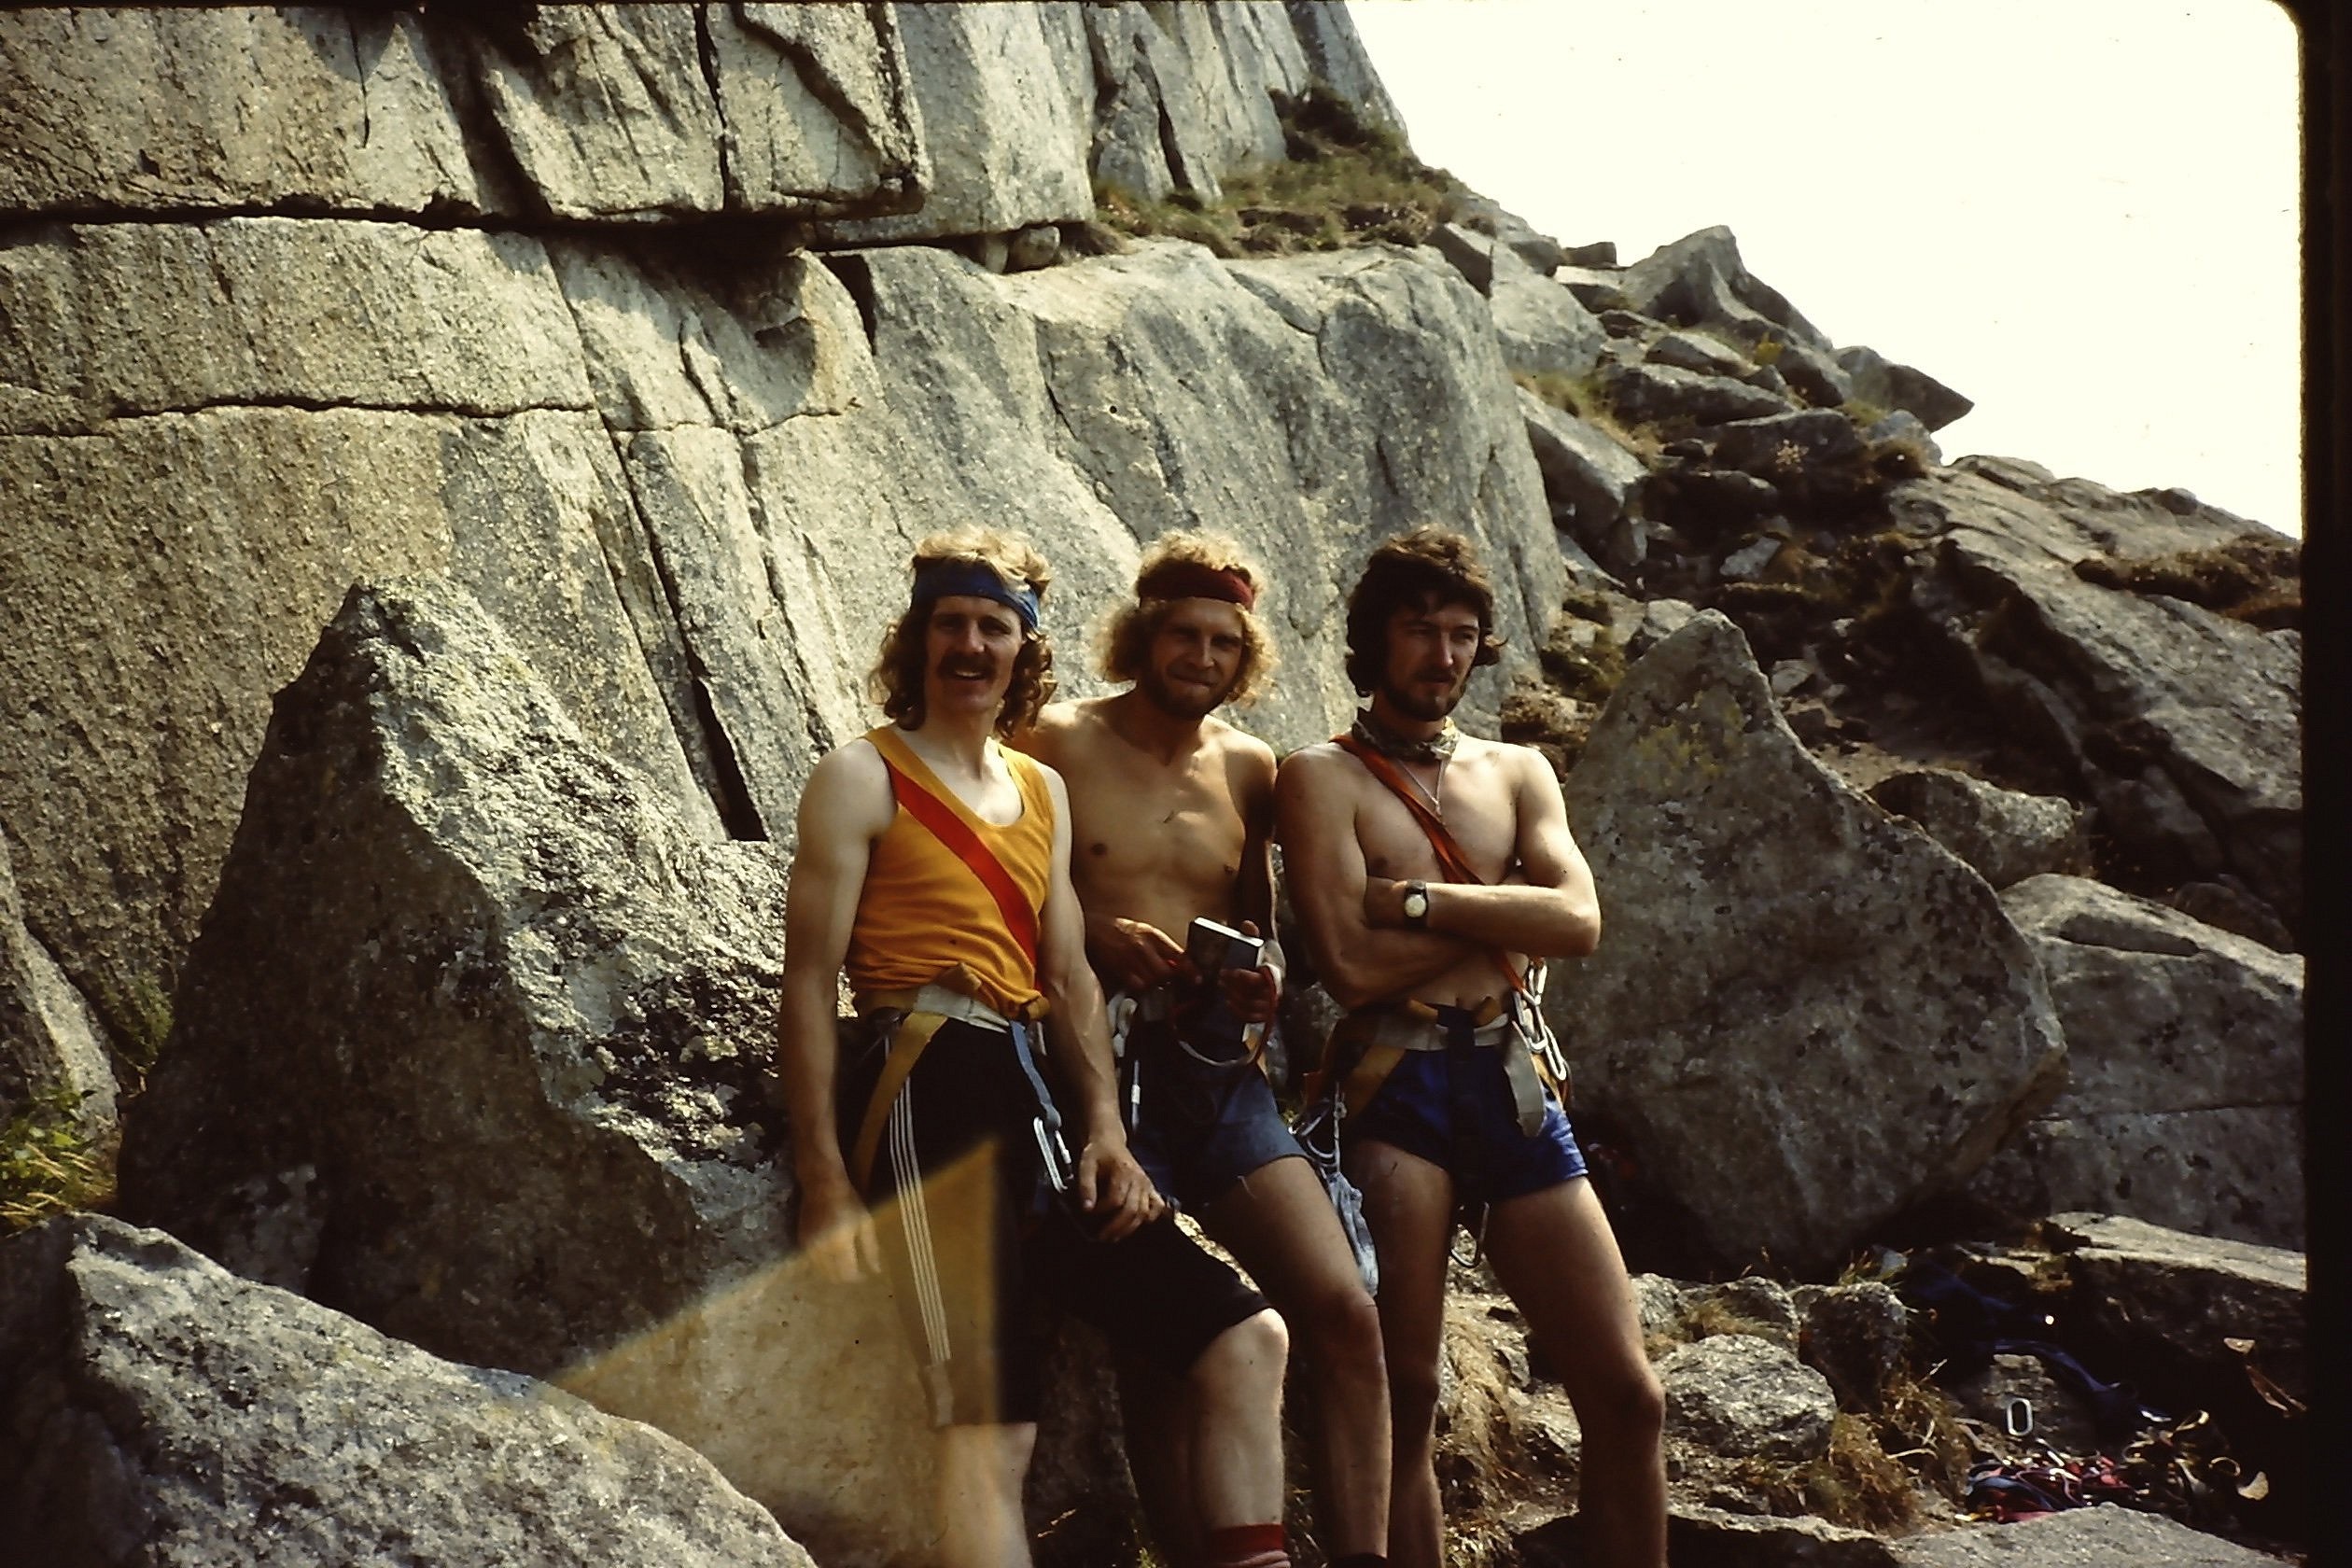 Rob Matheson (L), John Eastham, (C) and Ed Cleasby (R) in 1976.   © Photo – Matheson collection.